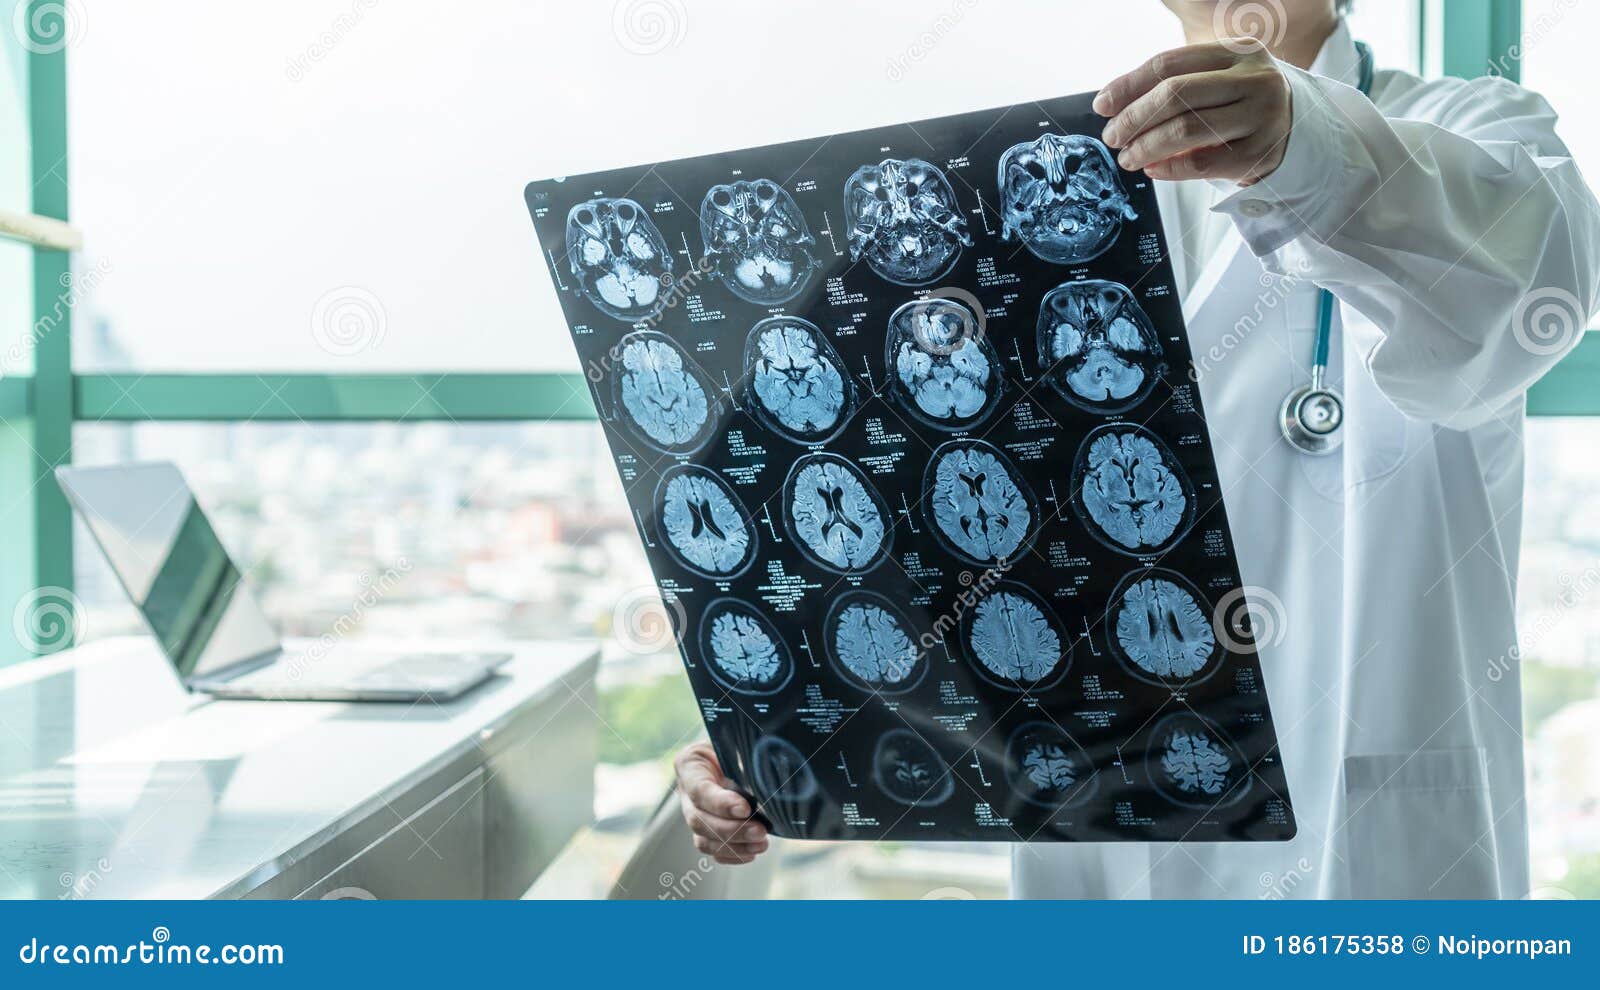 brain disease diagnosis with medical doctor seeing magnetic resonance imaging mri film diagnosing elderly ageing patient